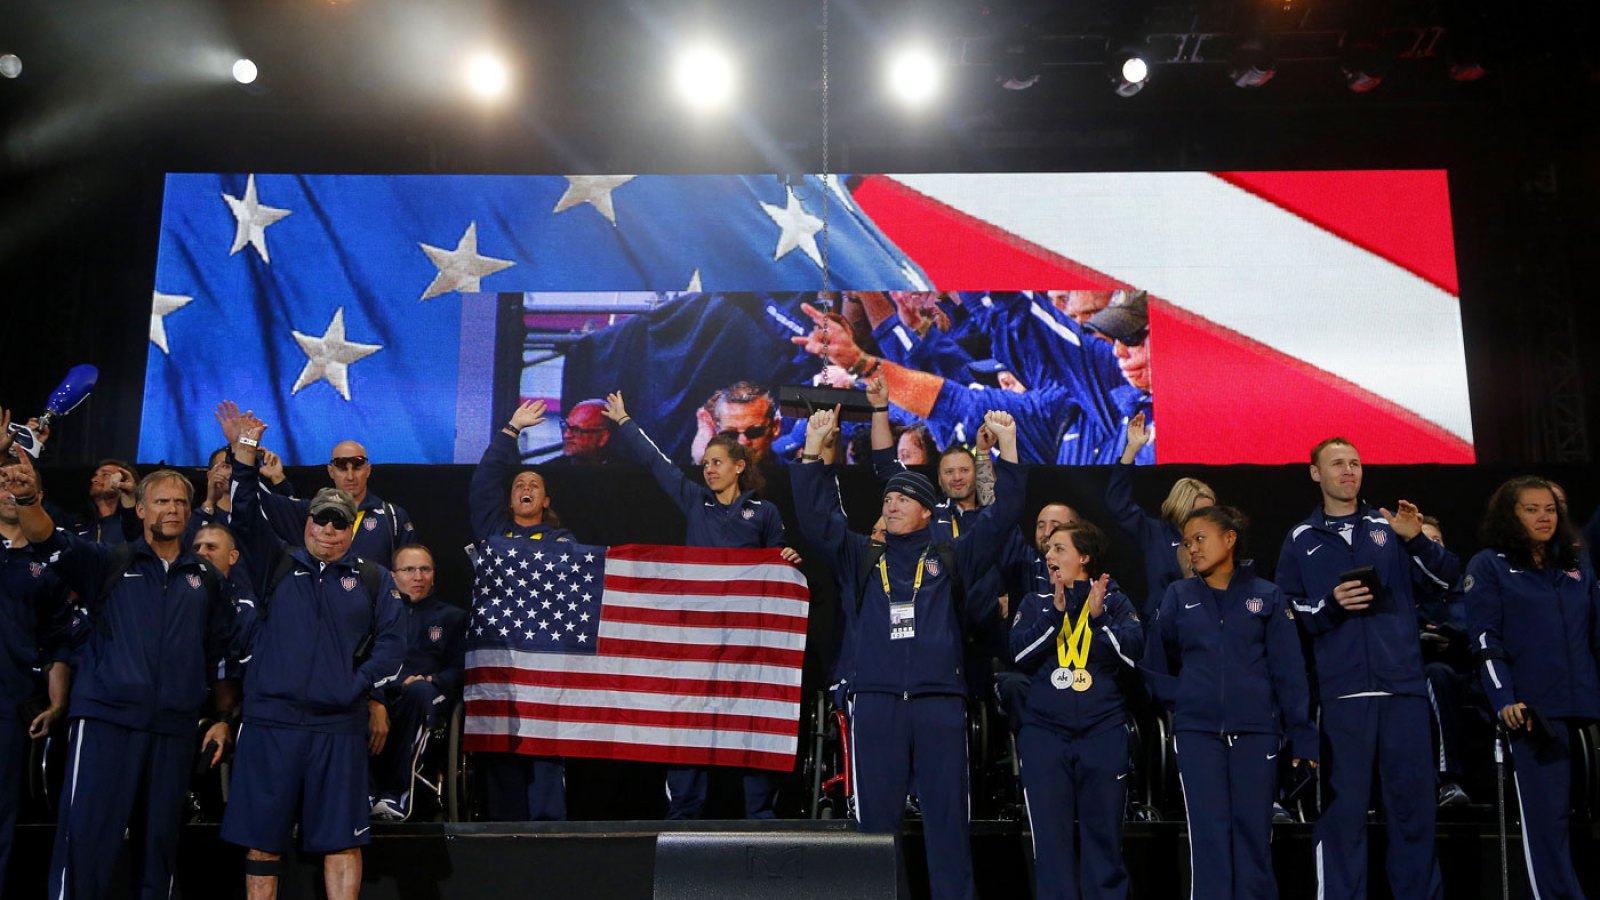 Team USA celebrate at the end of the 2014 Invictus Games